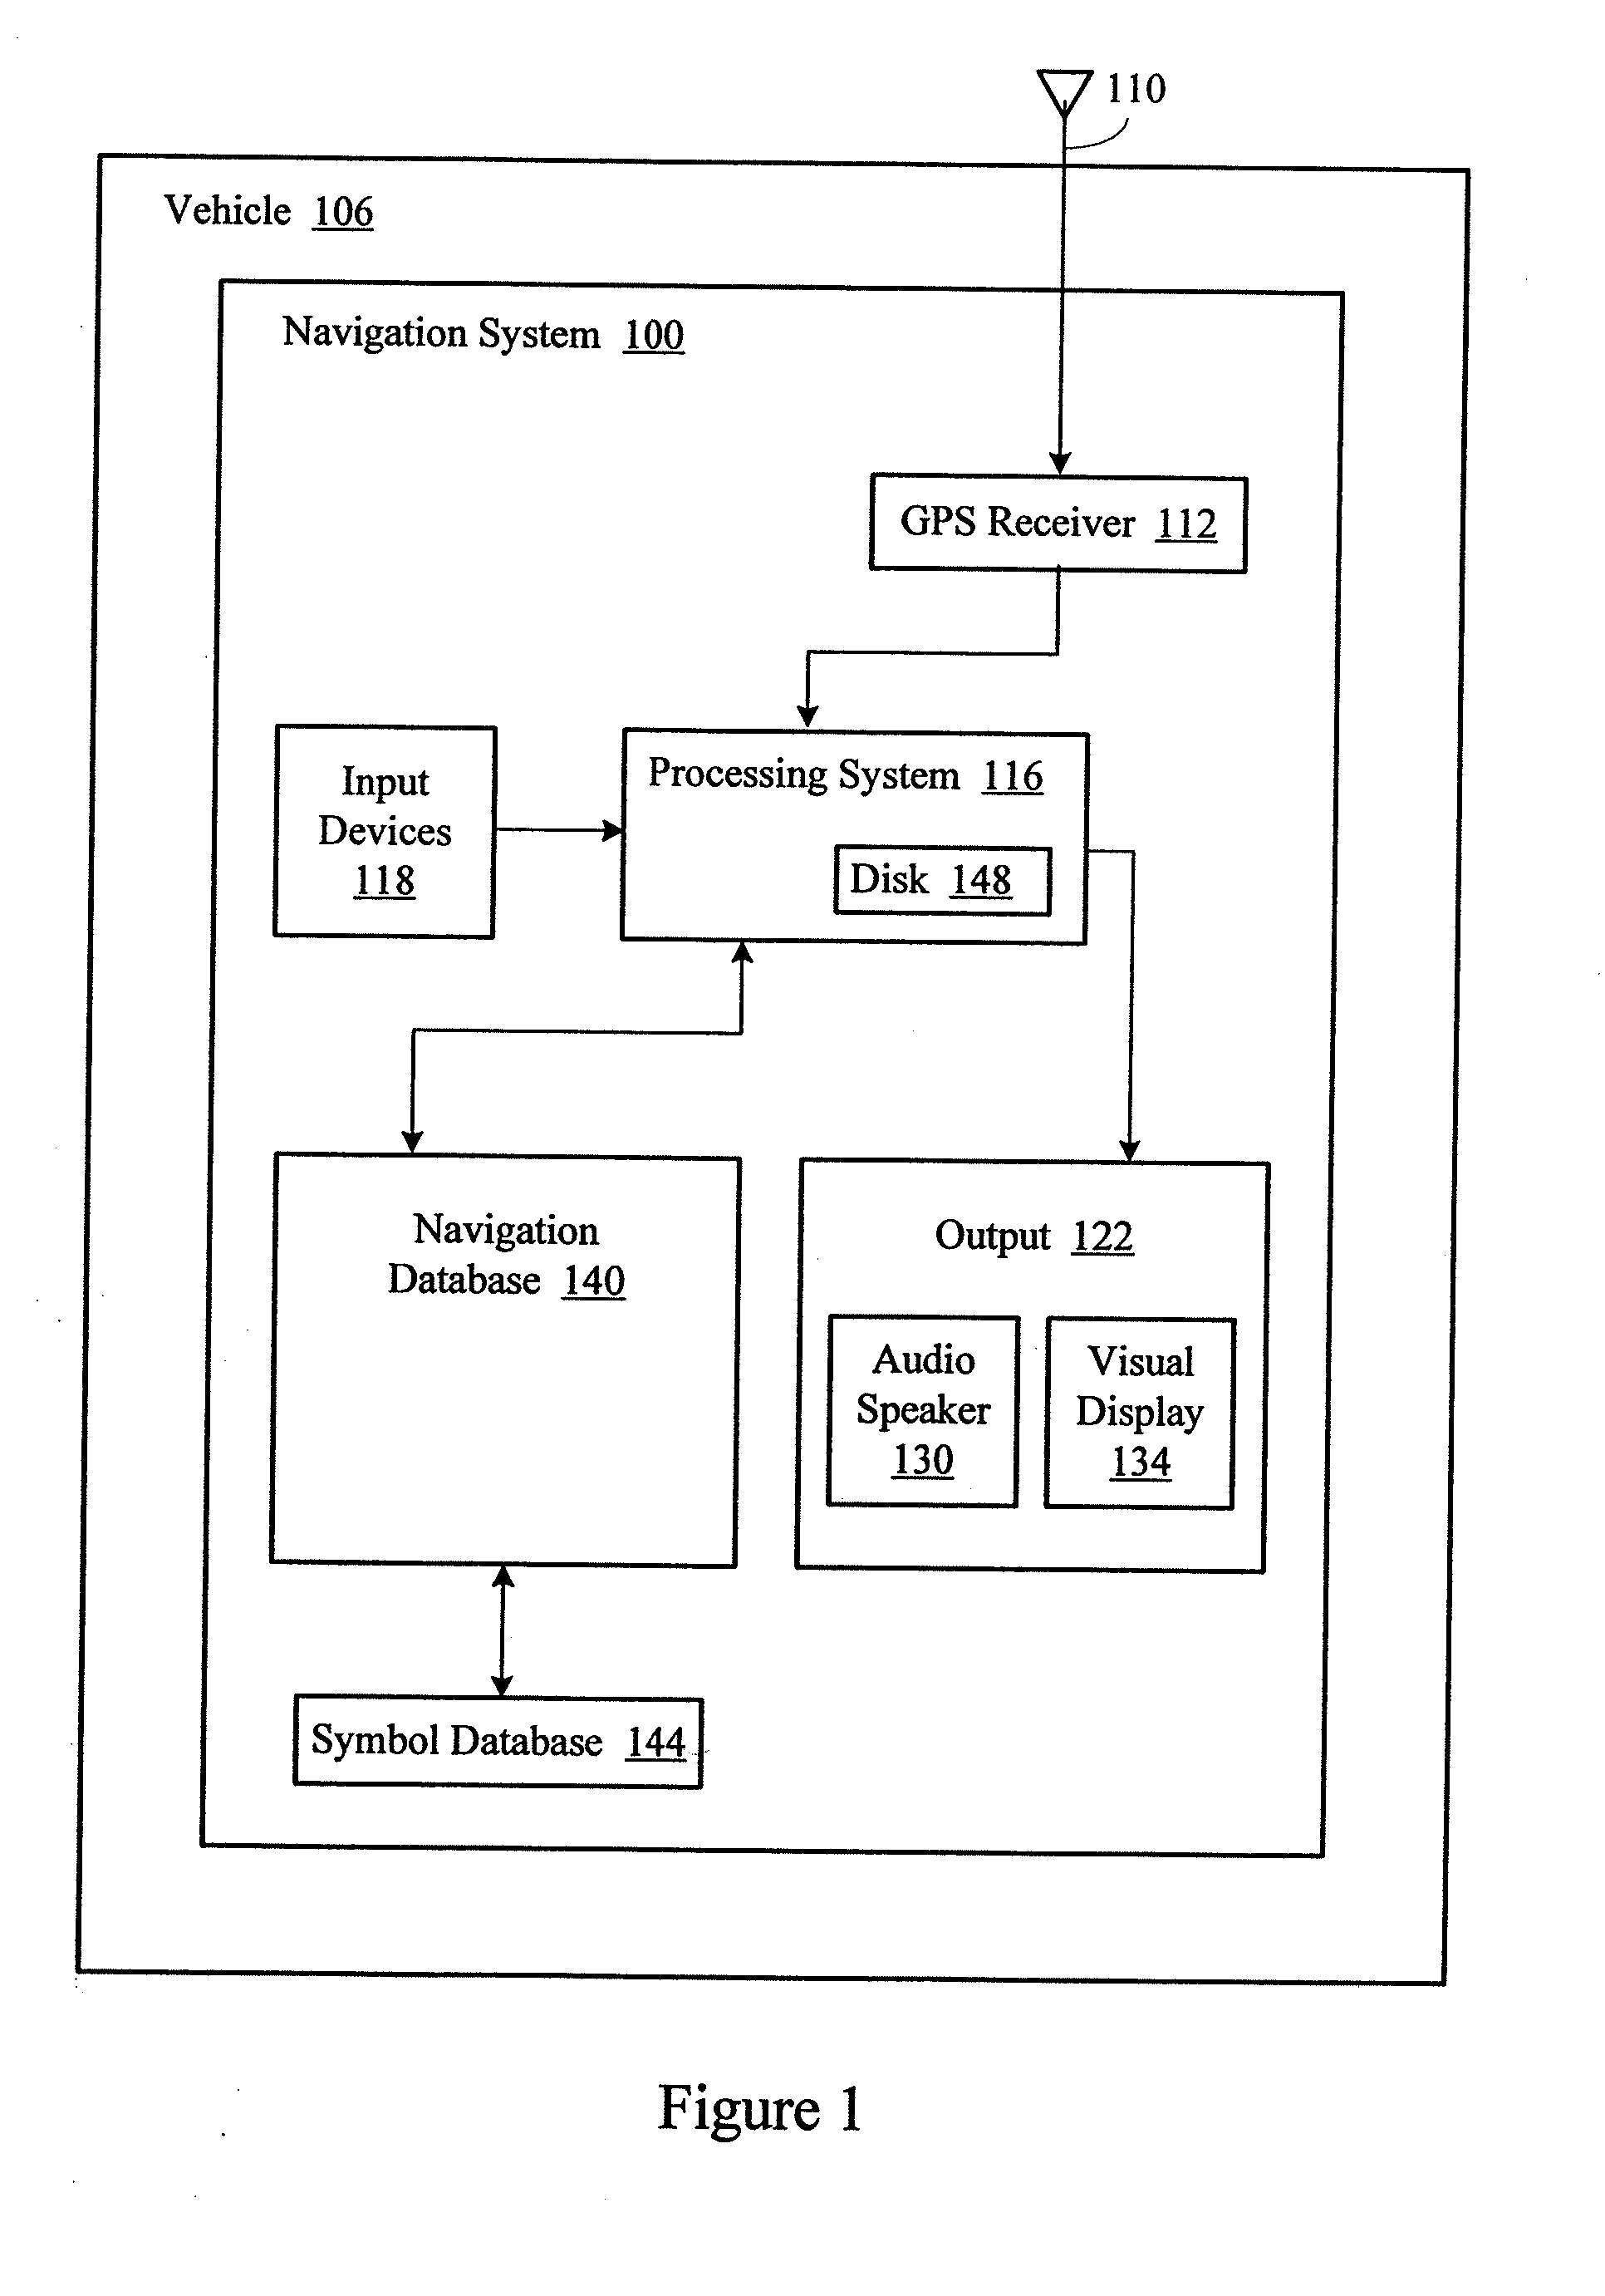 Storage and visualization of points of interest in a navigation system